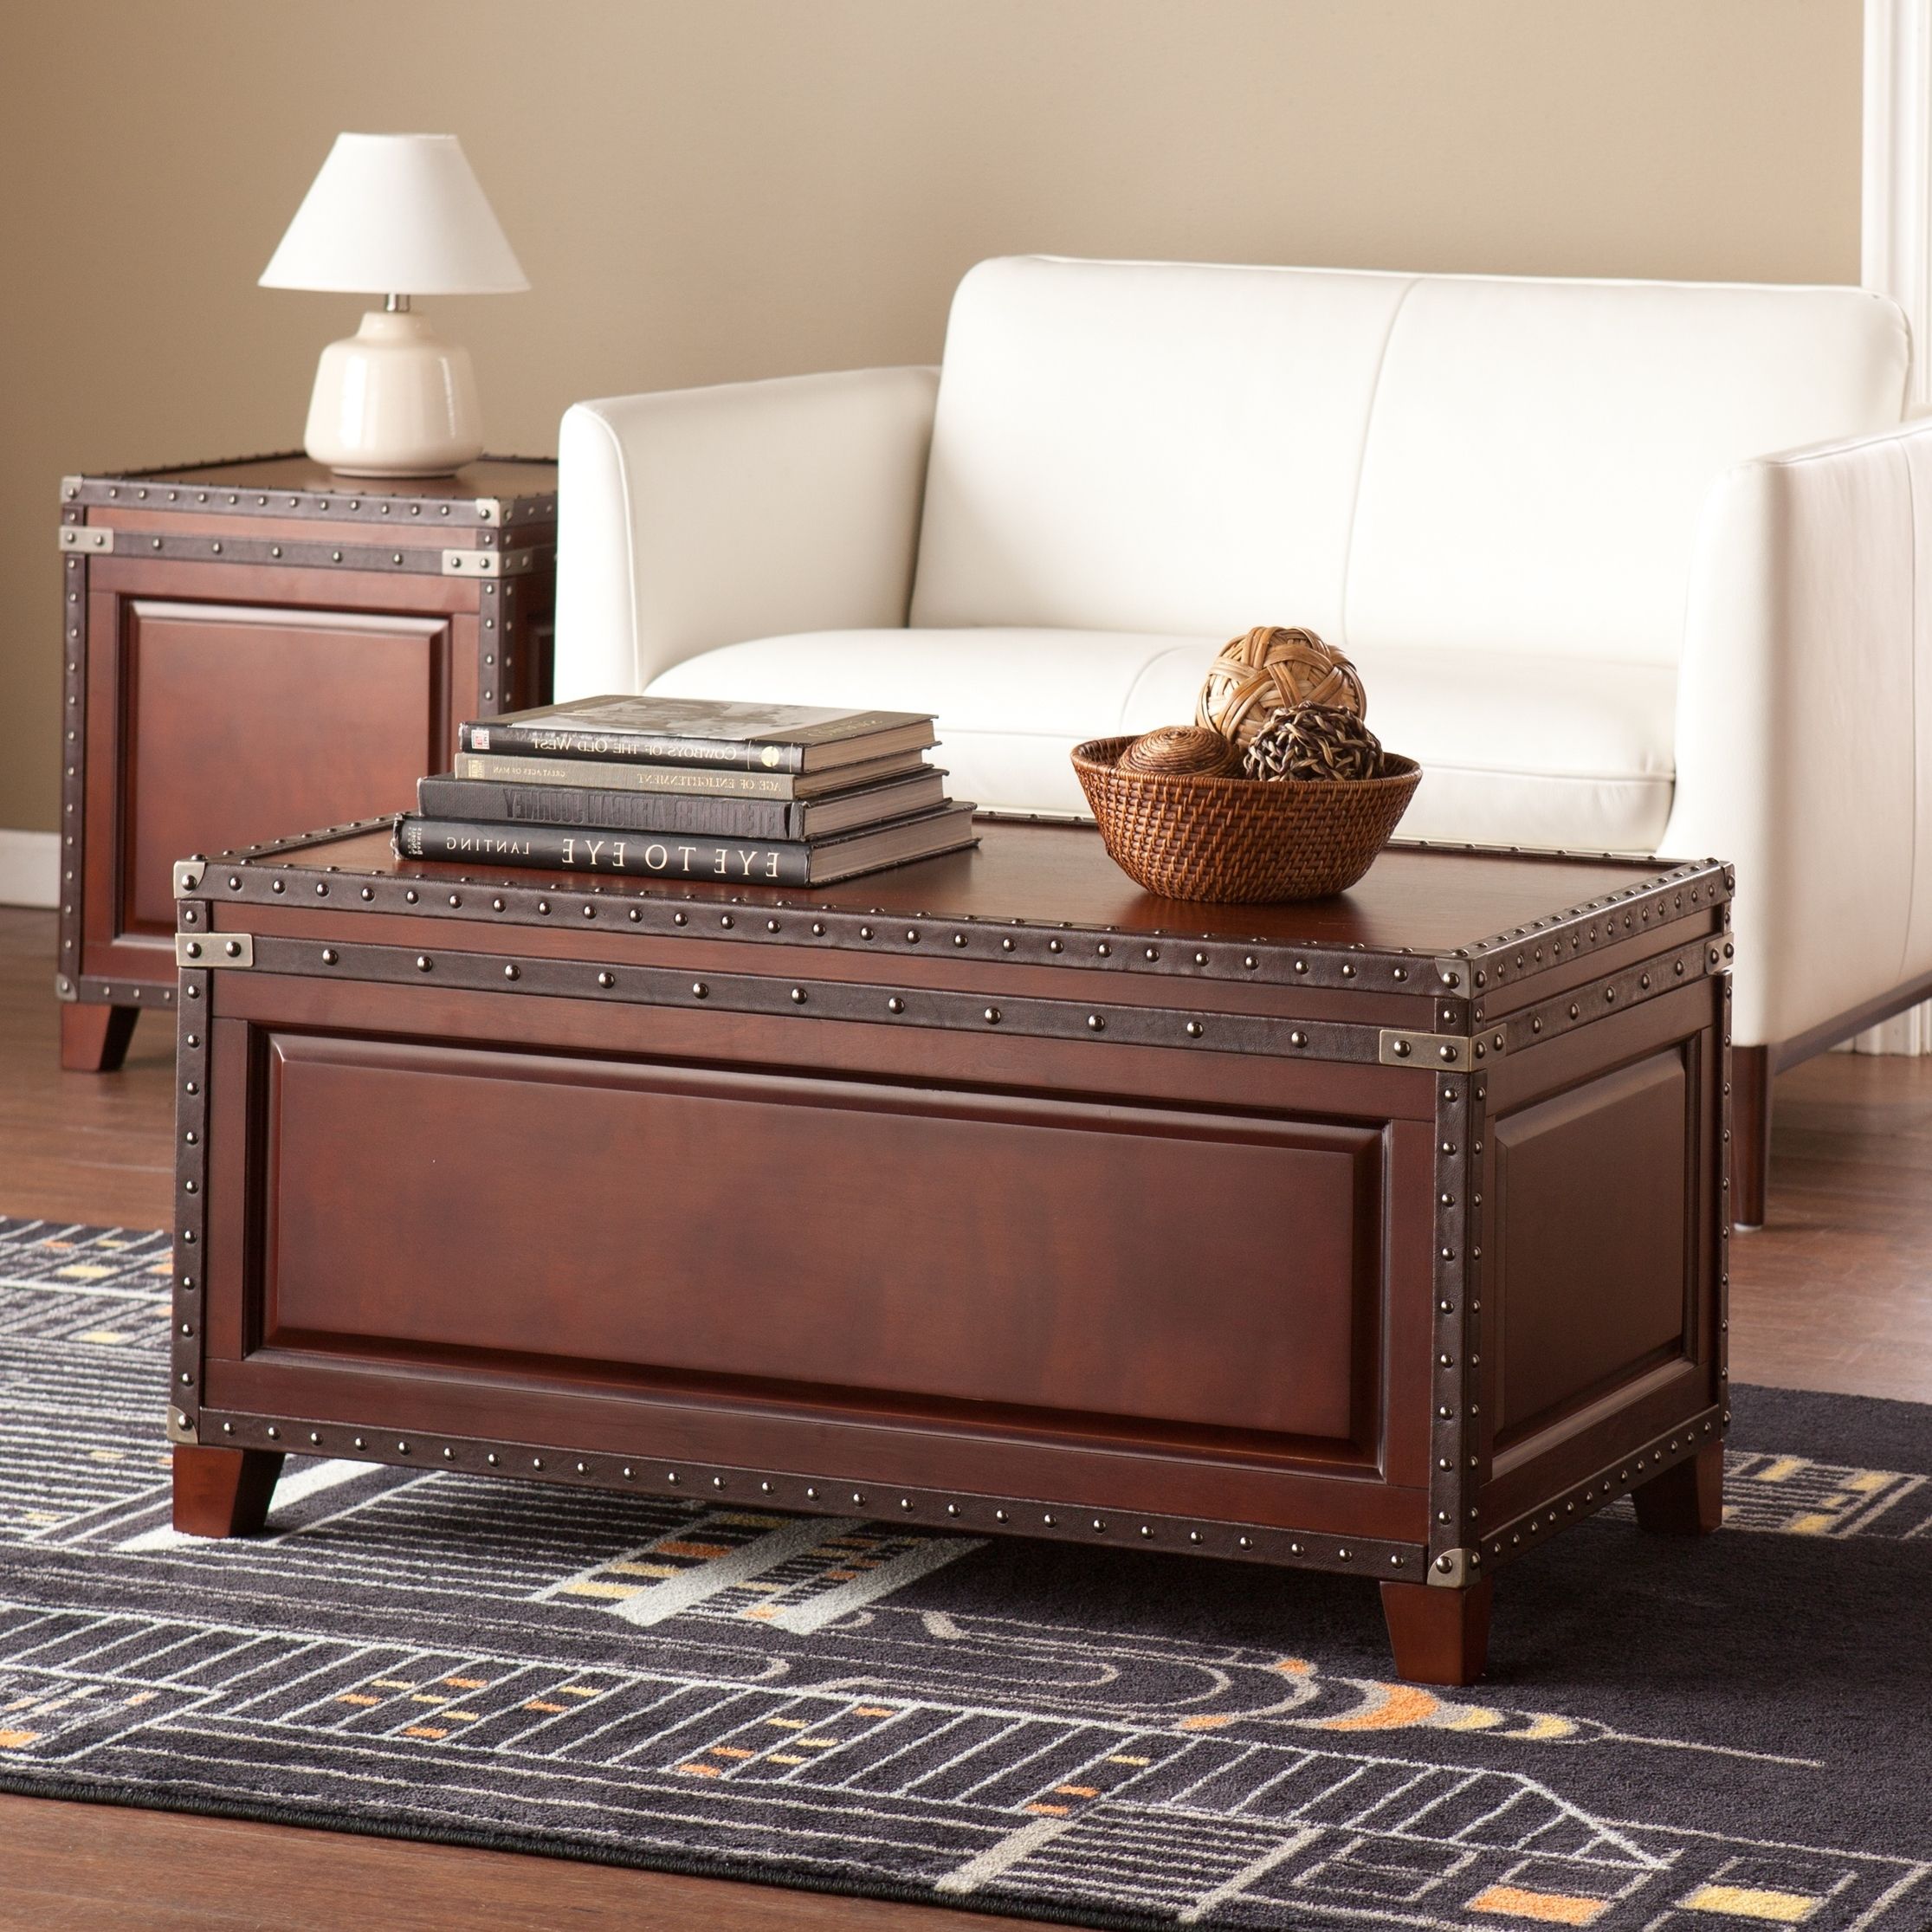 Well Liked Walnut Wood Storage Trunk Cocktail Tables Within Coffee Table With Storage Trunk Chest Hidden Bin Leather (View 6 of 20)